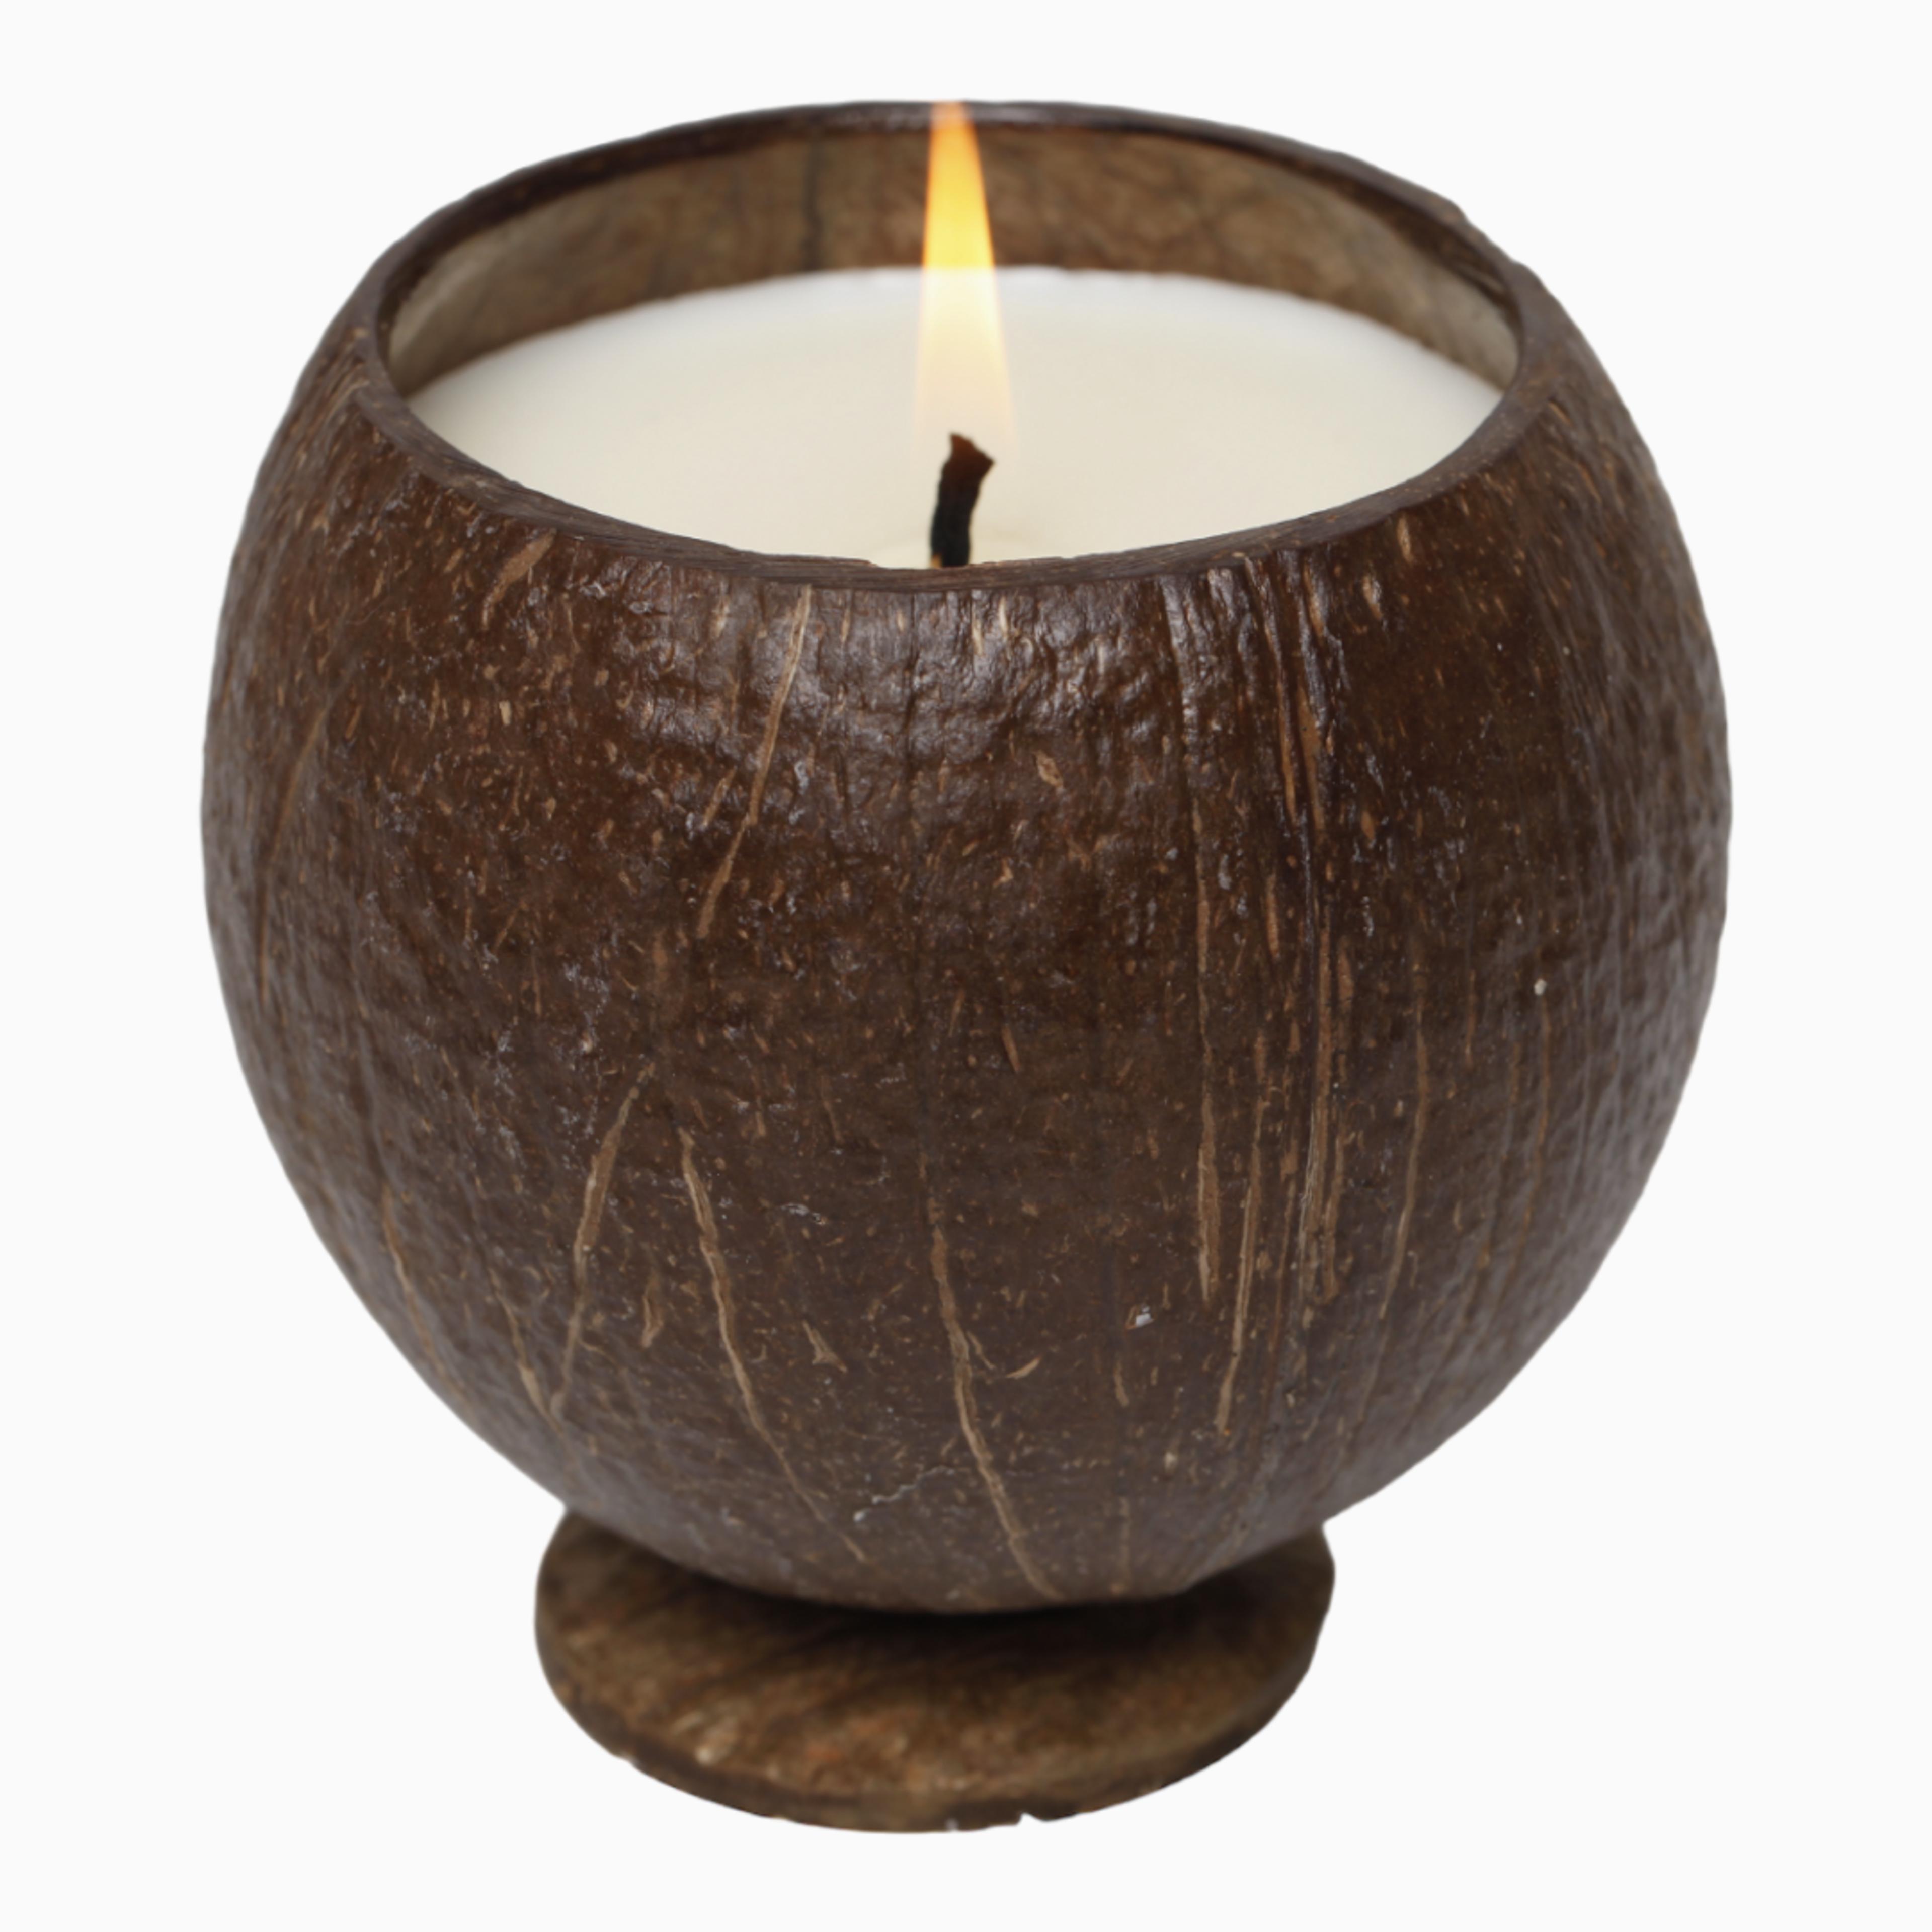 10oz Coconut Cup Outdoor Candle